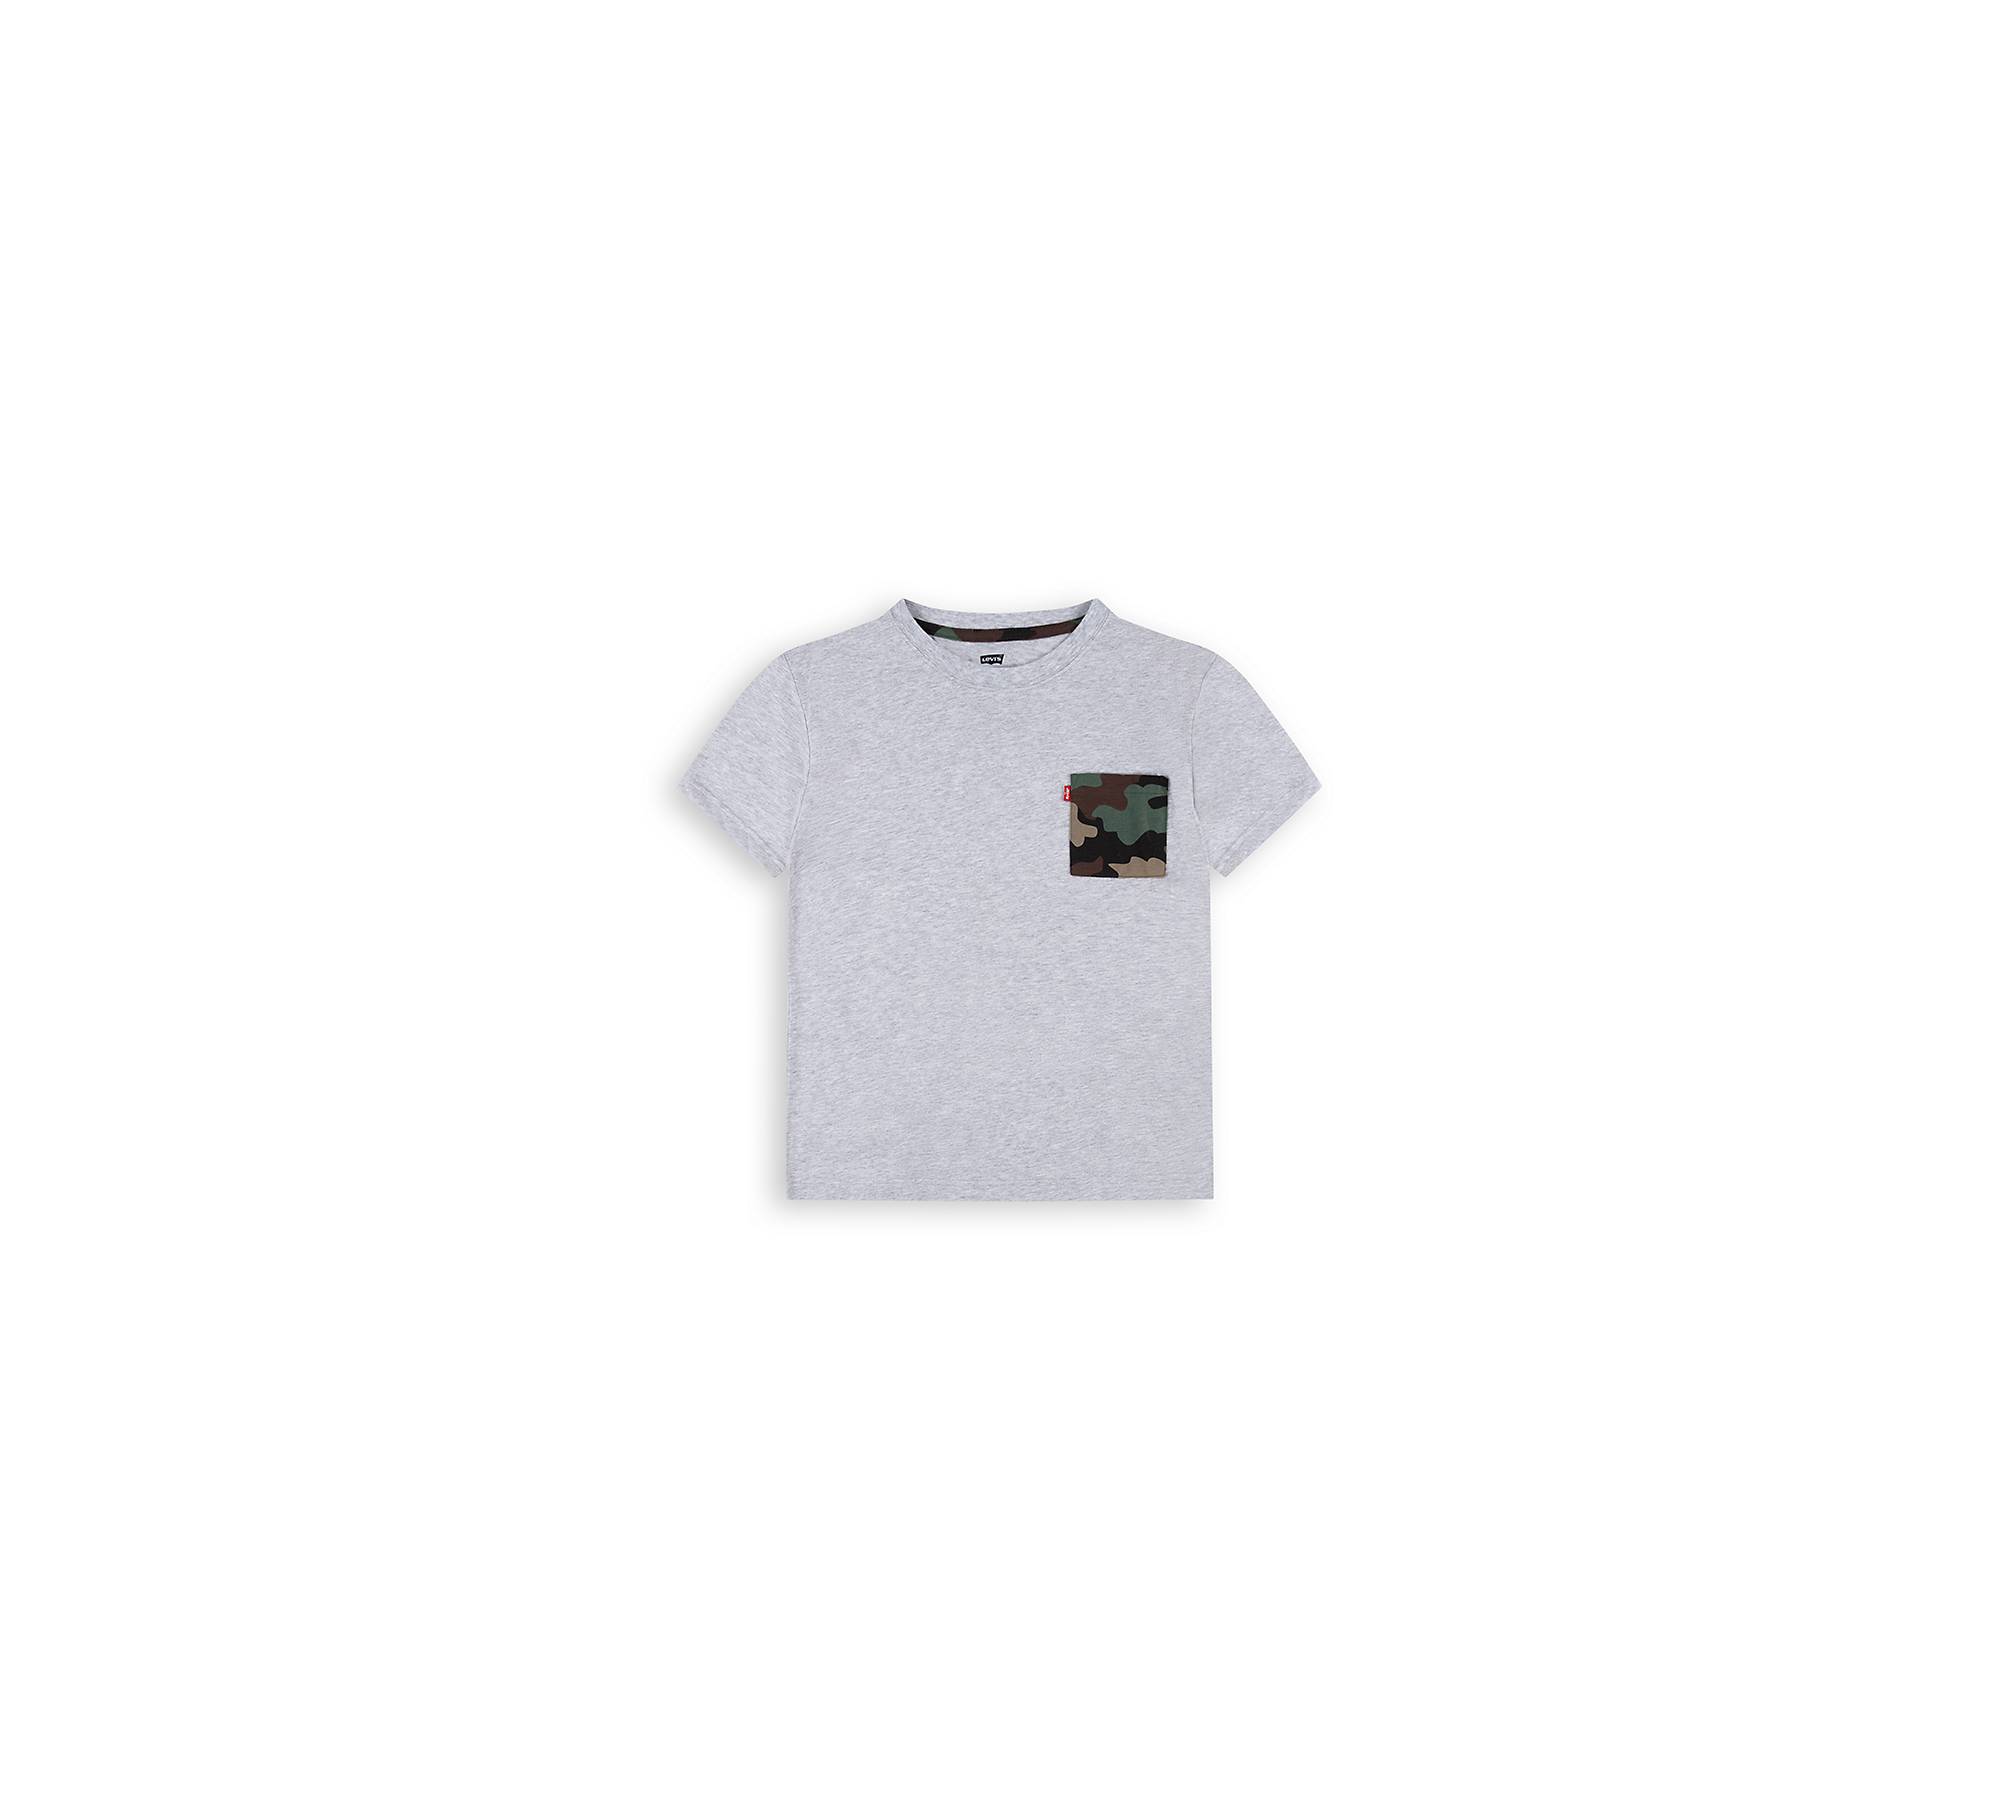 Relaxed Fit T-Shirt mit Tasche und Camo-Muster 1